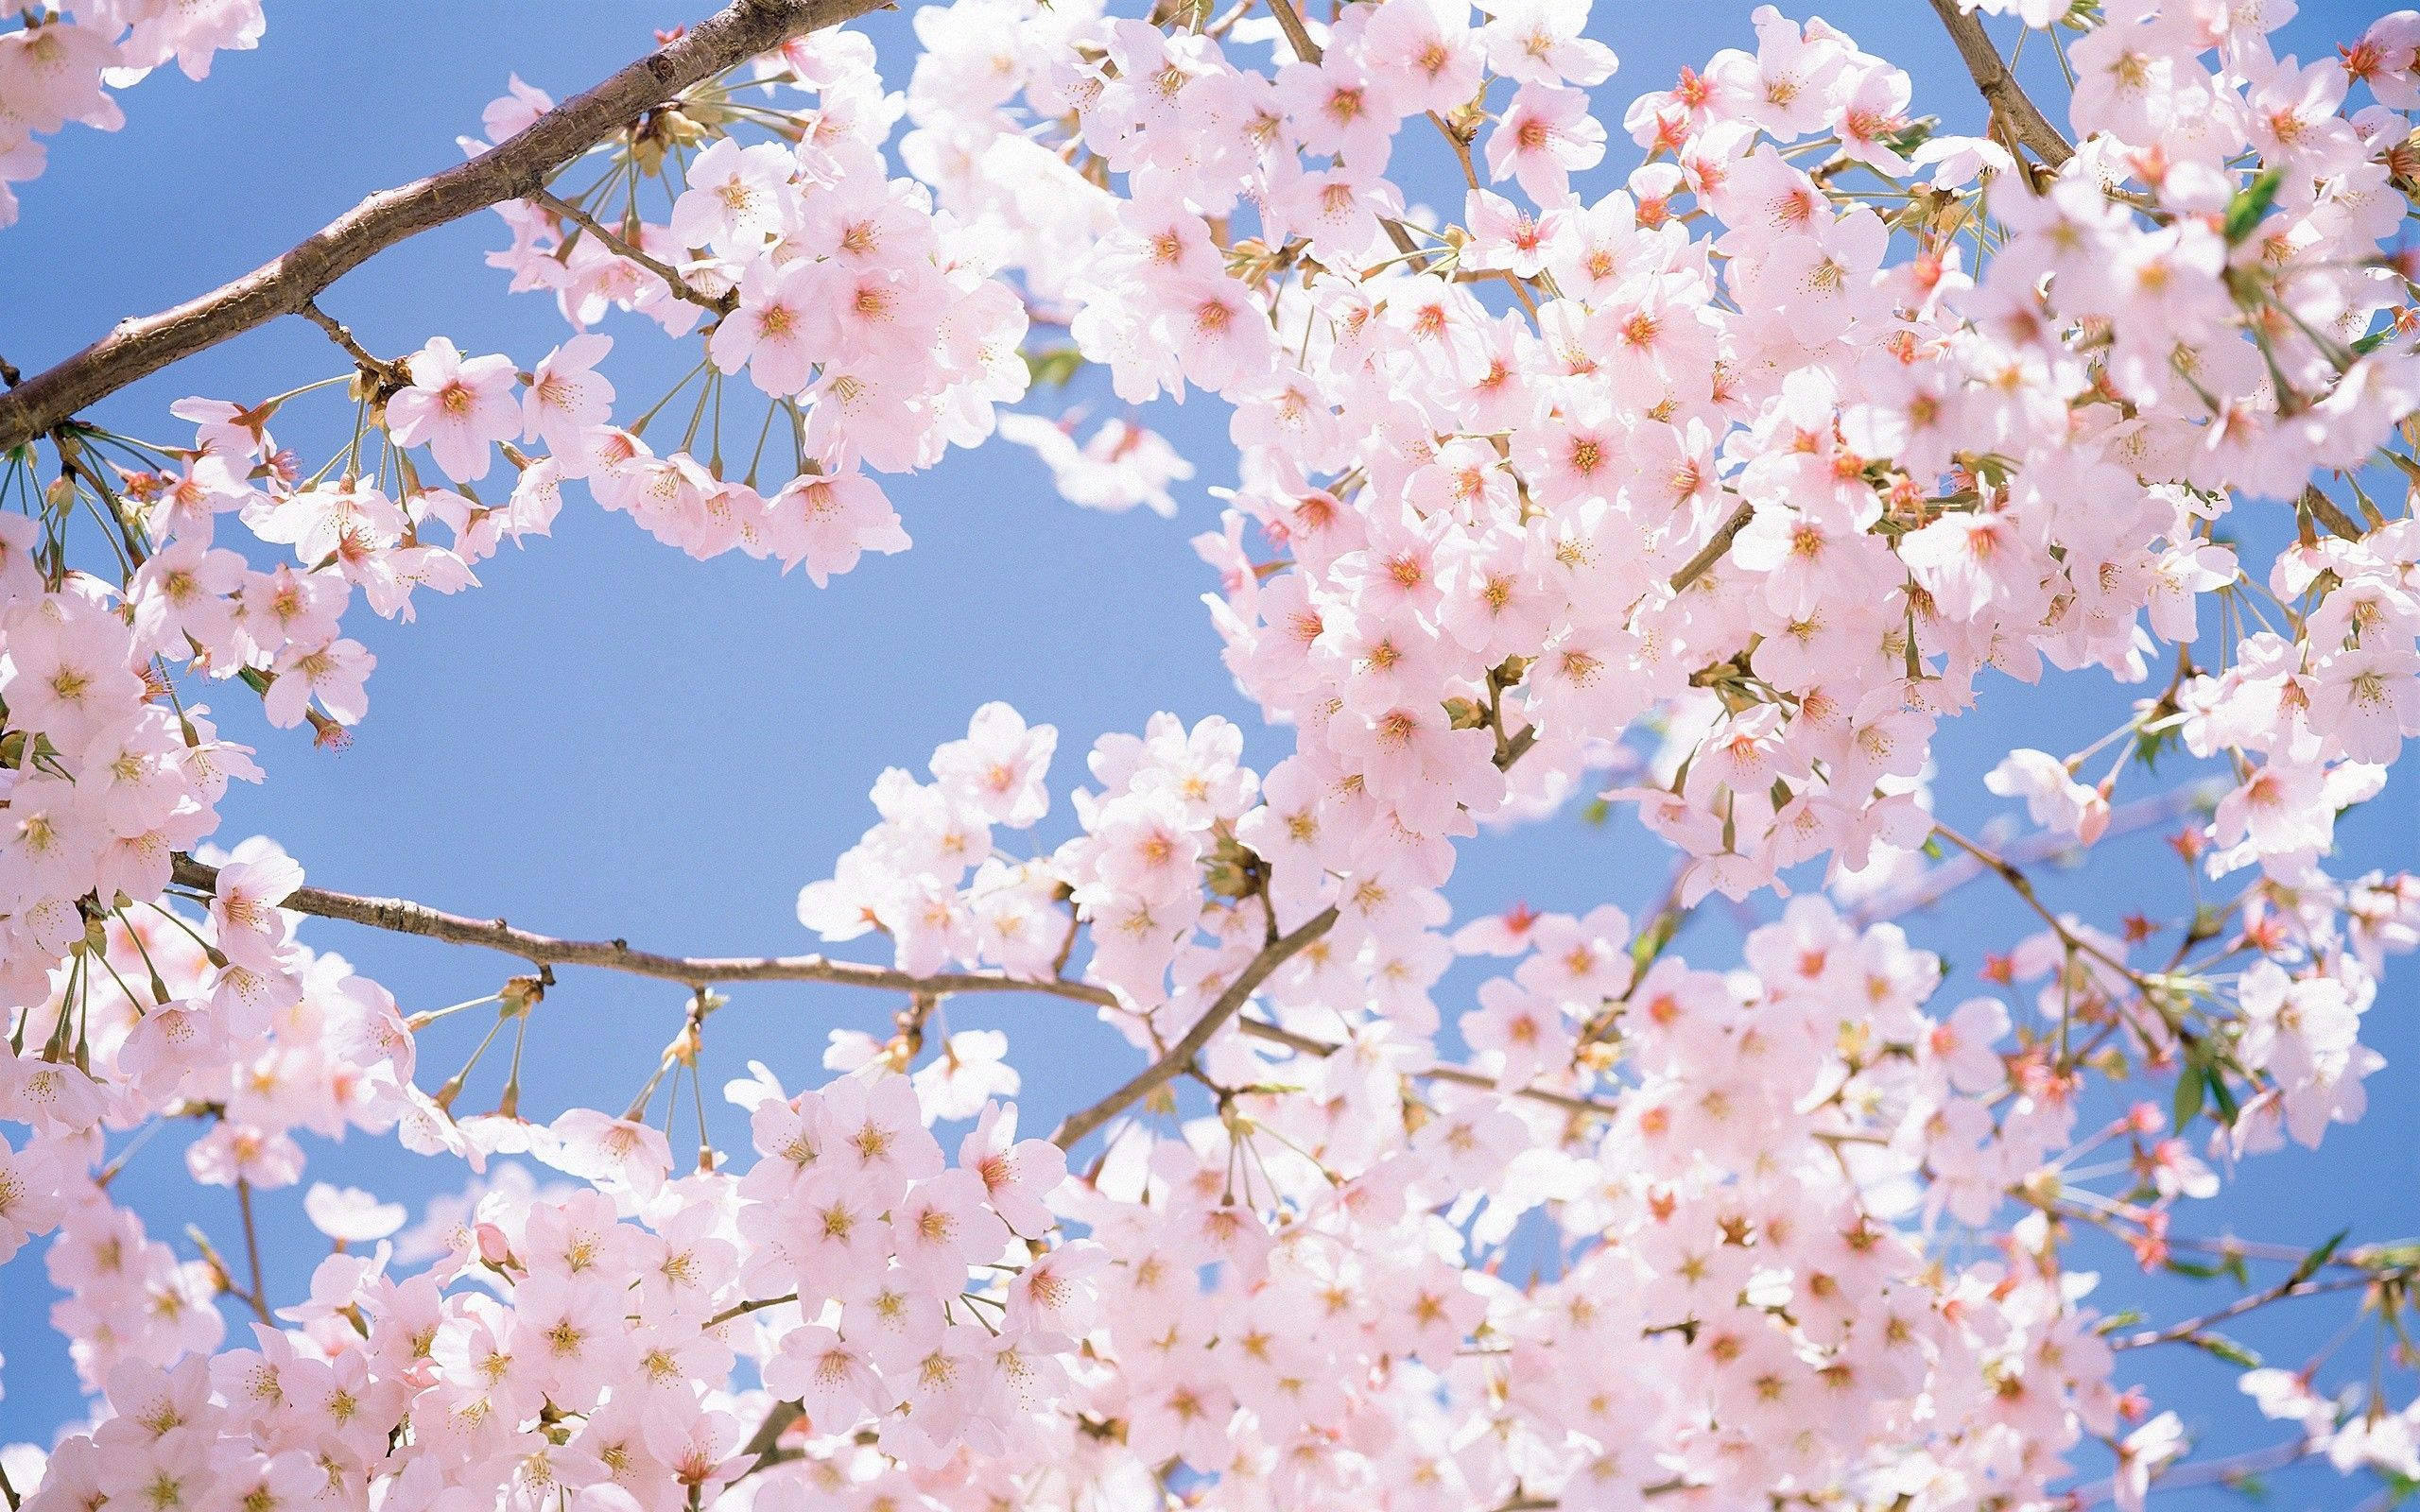 A tree with pink flowers against a blue sky. - Cherry blossom, cherry